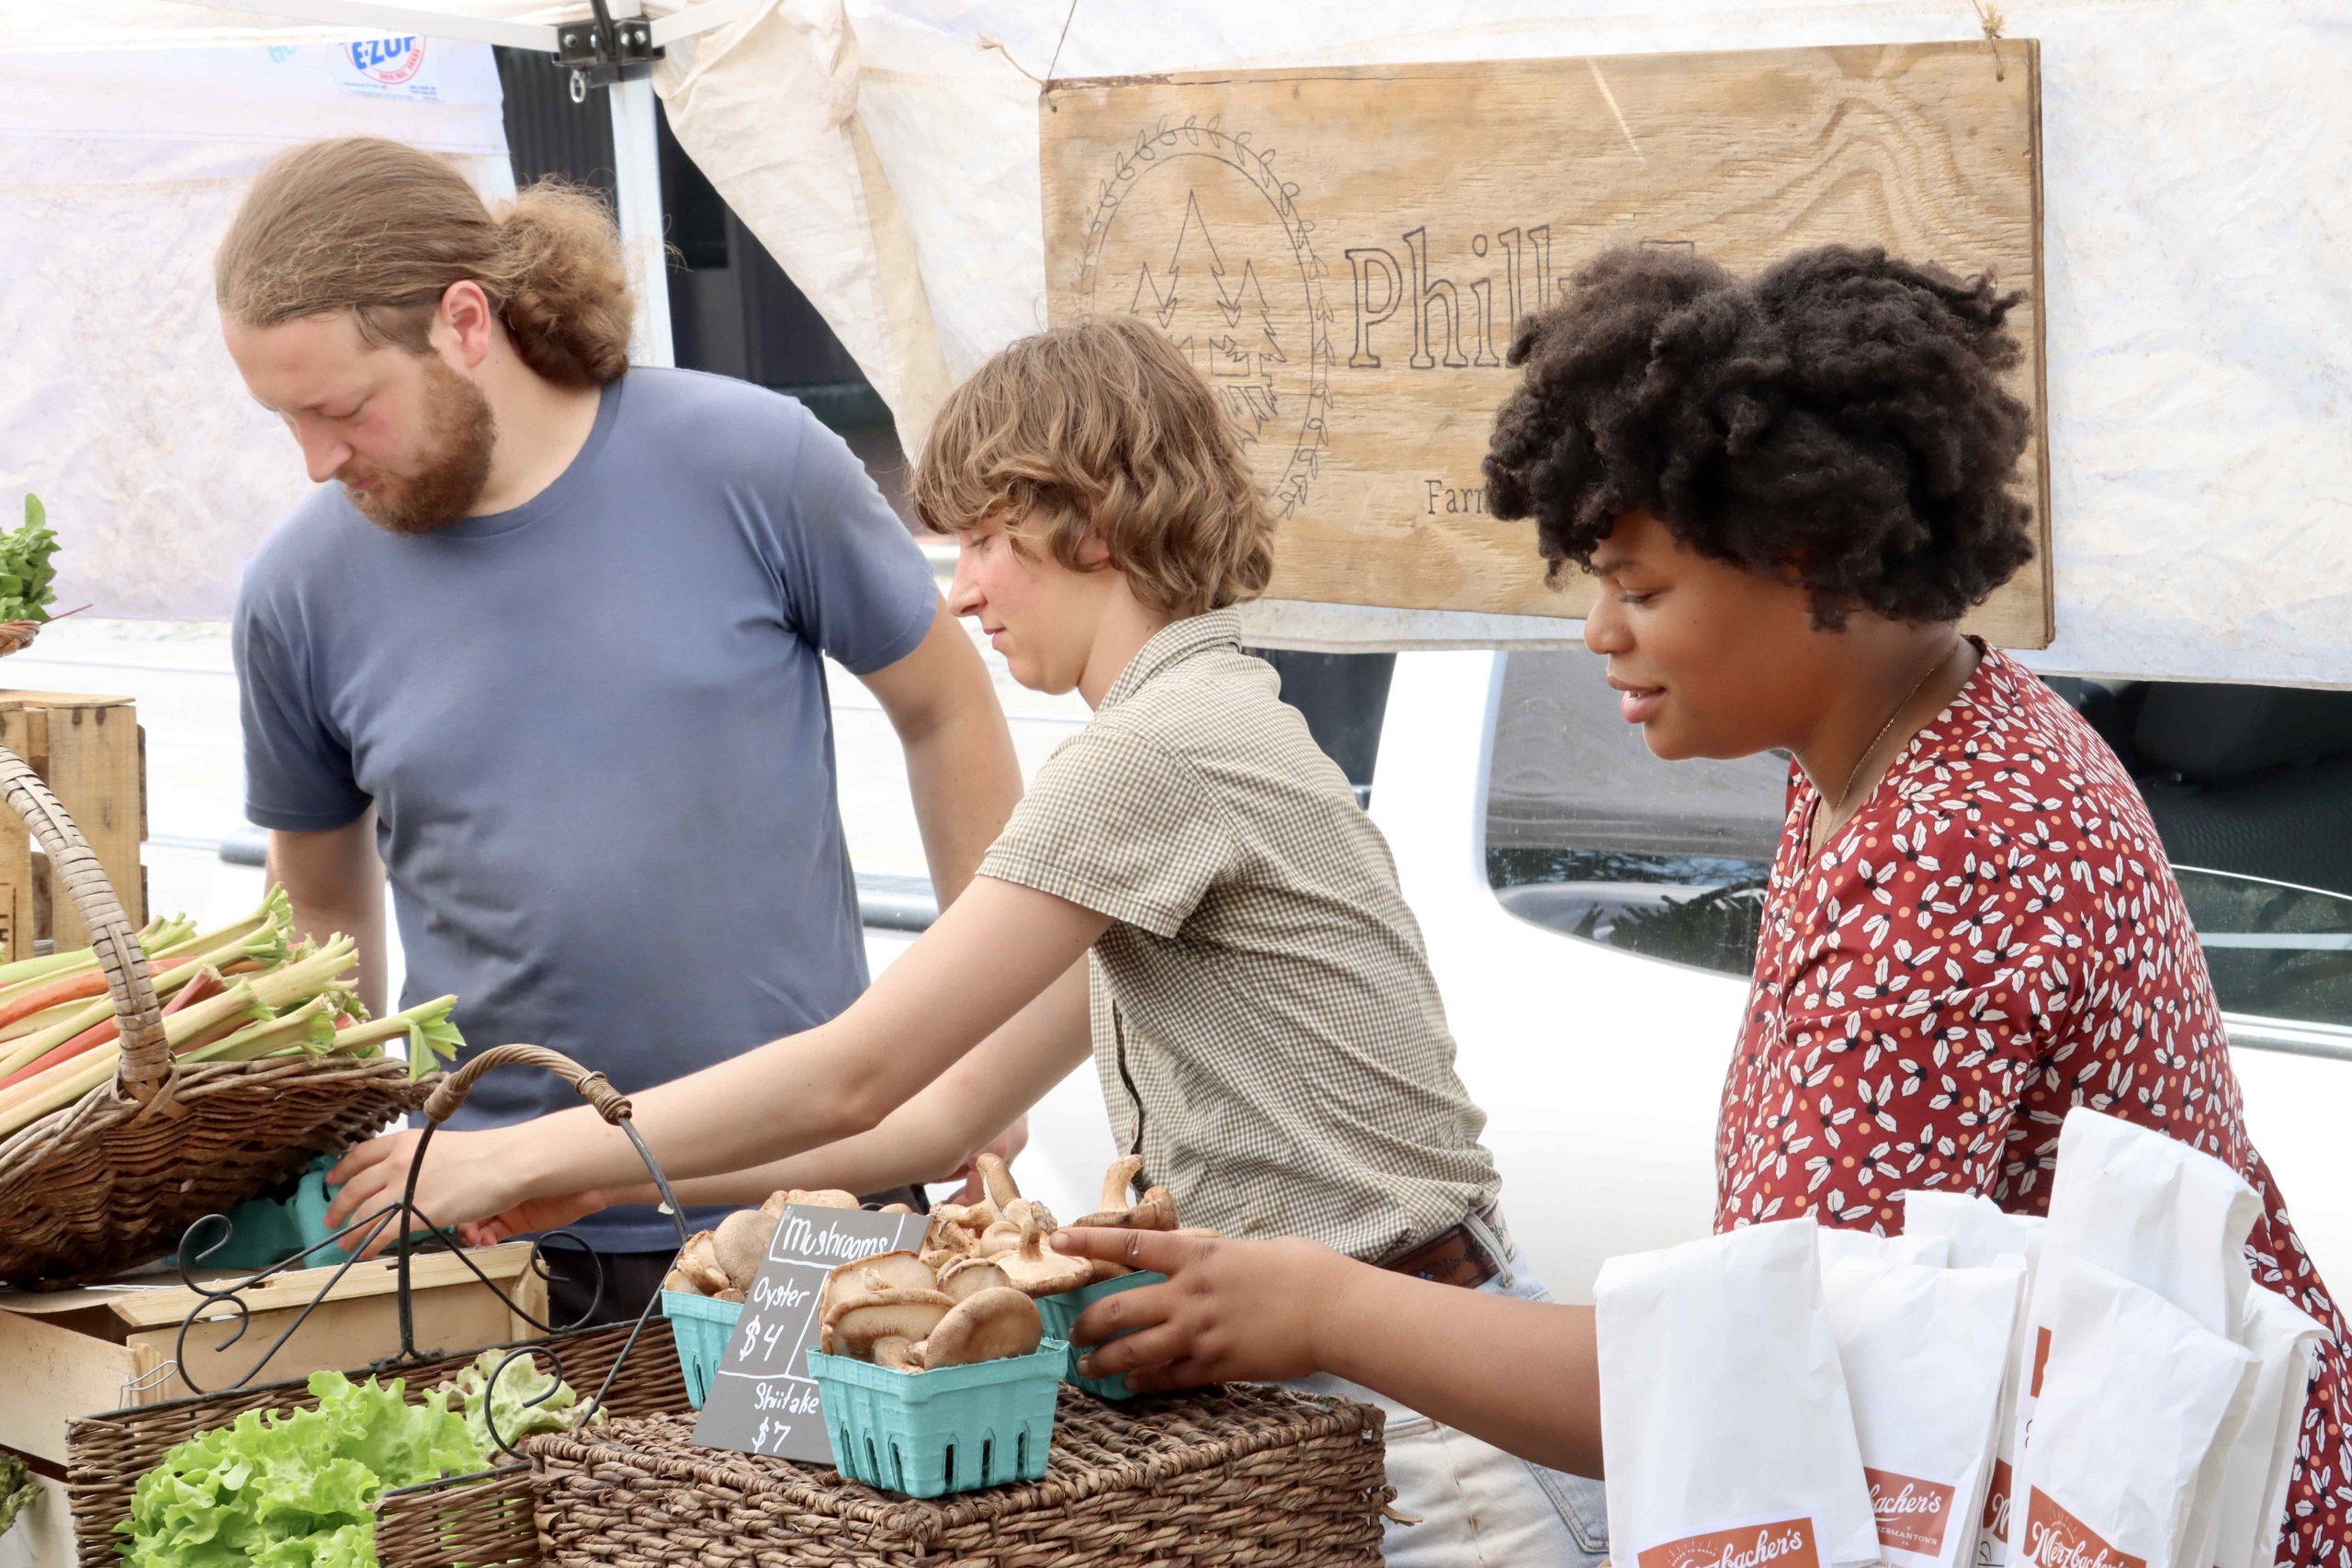 Germantown Farmers Market is back for a second season under Philly Forests